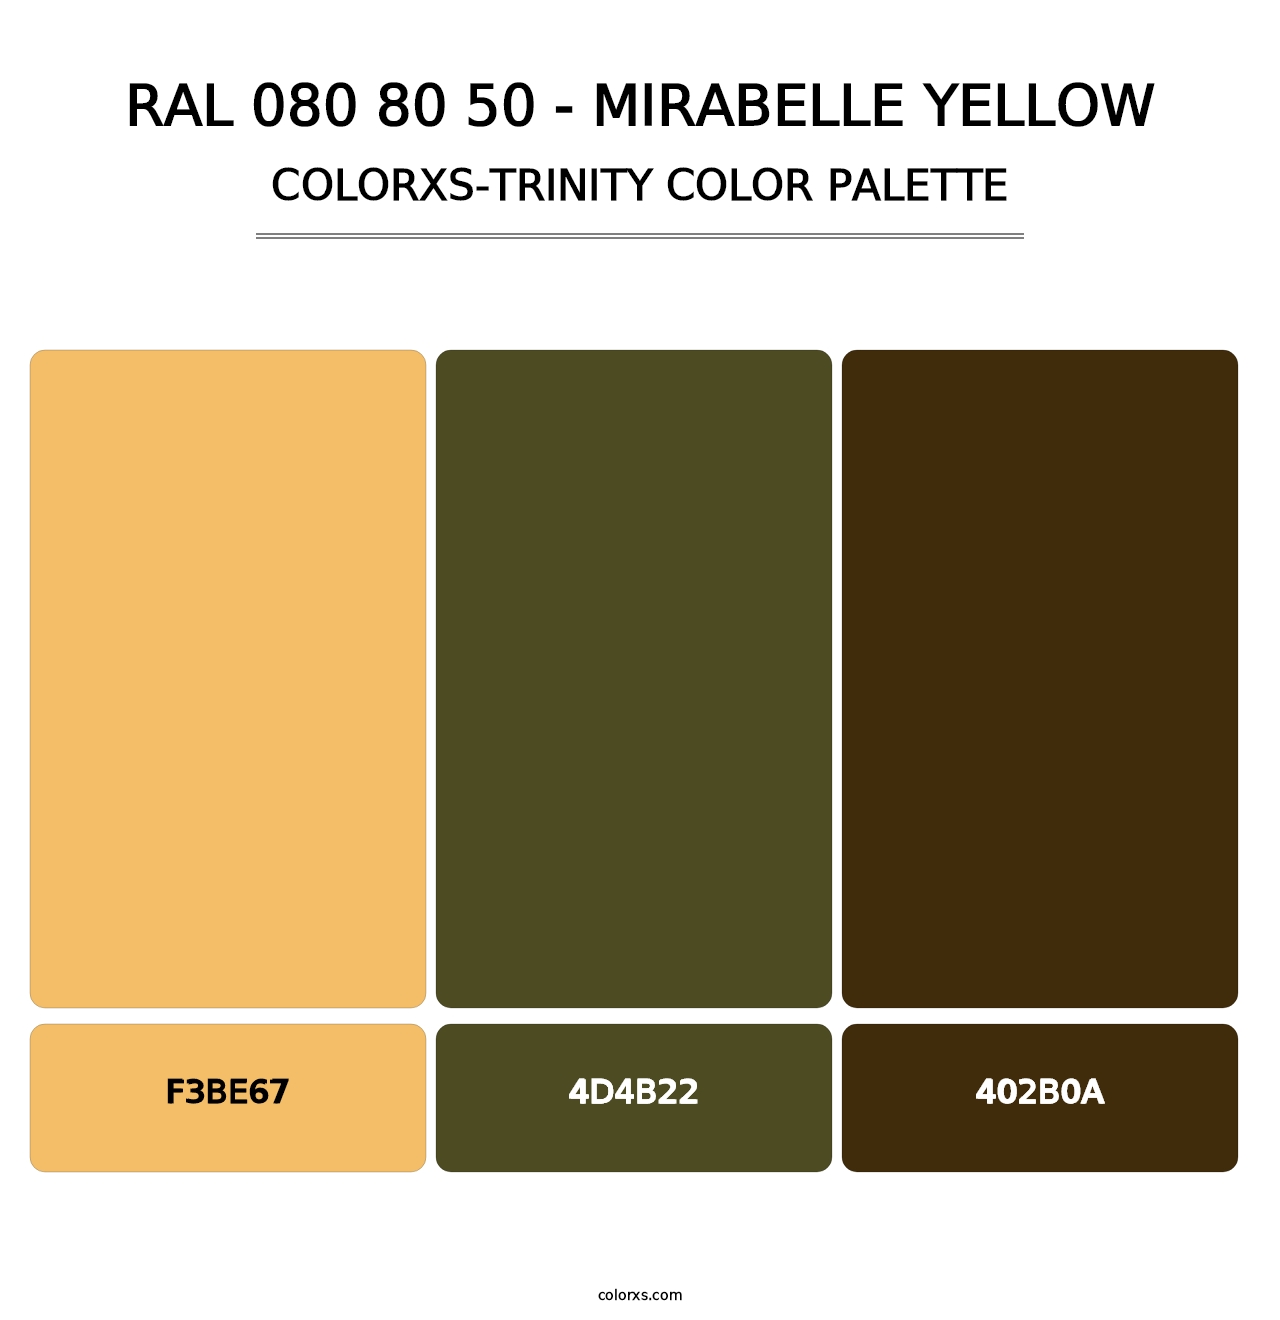 RAL 080 80 50 - Mirabelle Yellow - Colorxs Trinity Palette